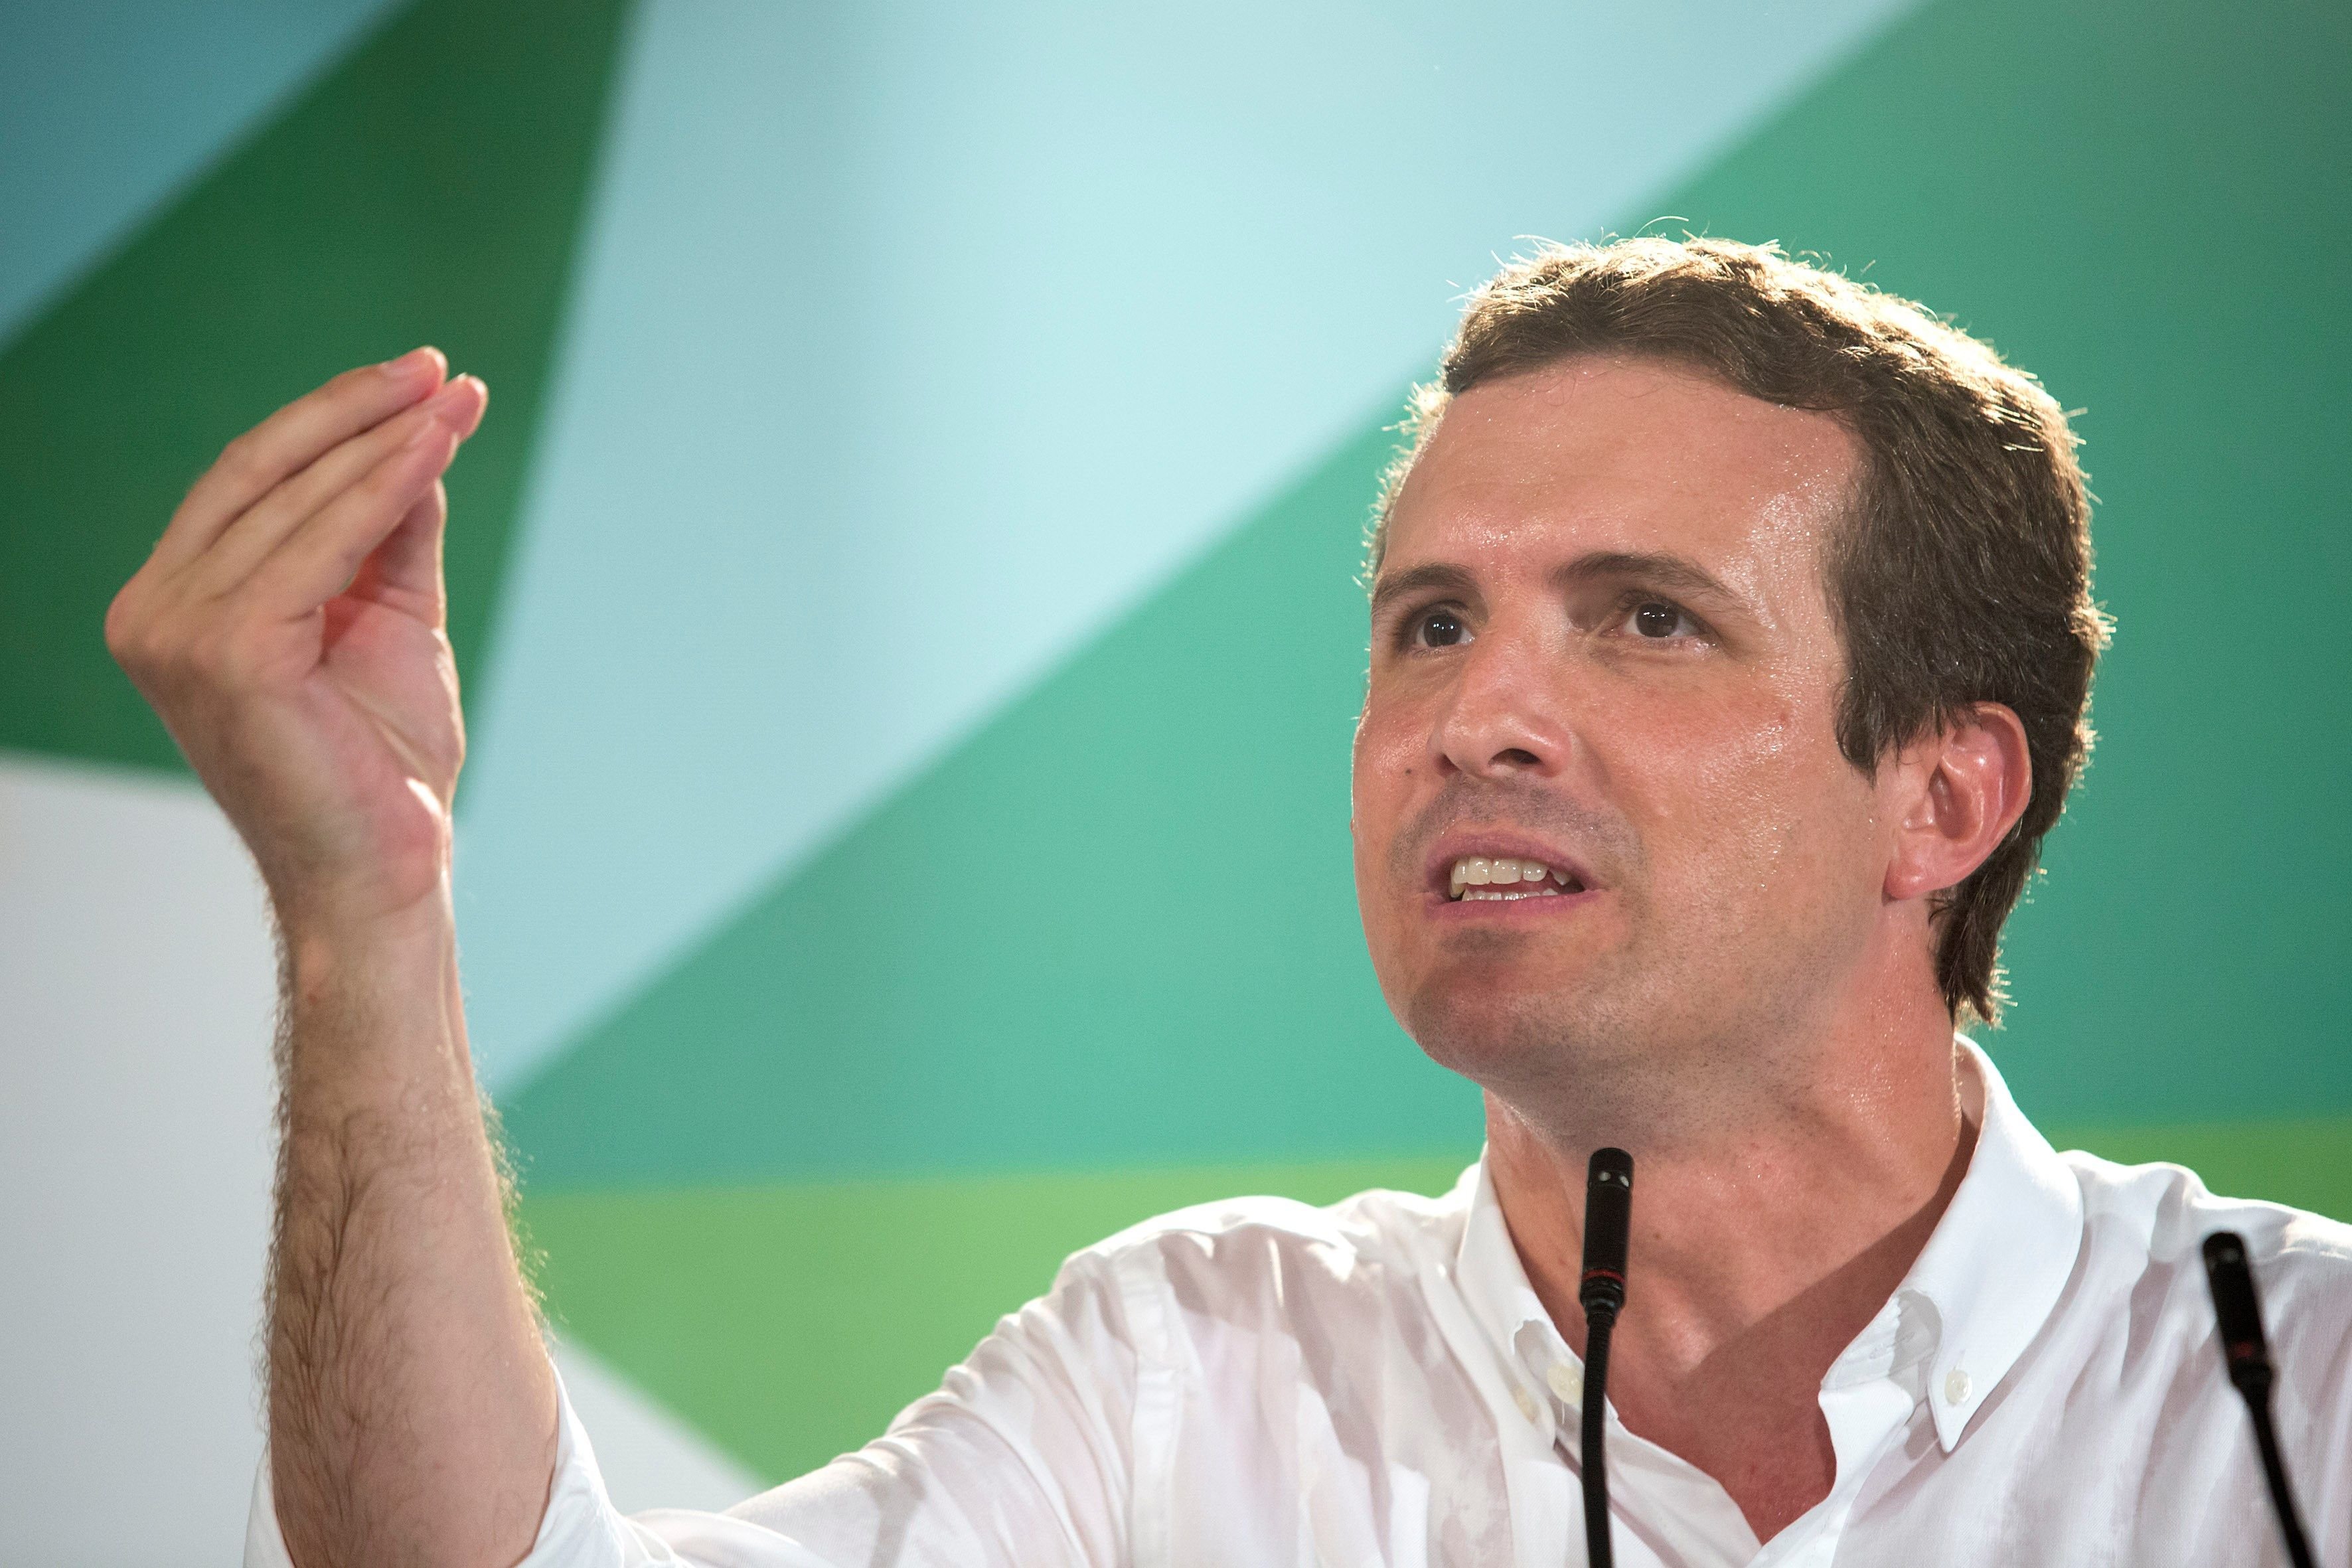 Casado proposes banning yellow loops from public roads